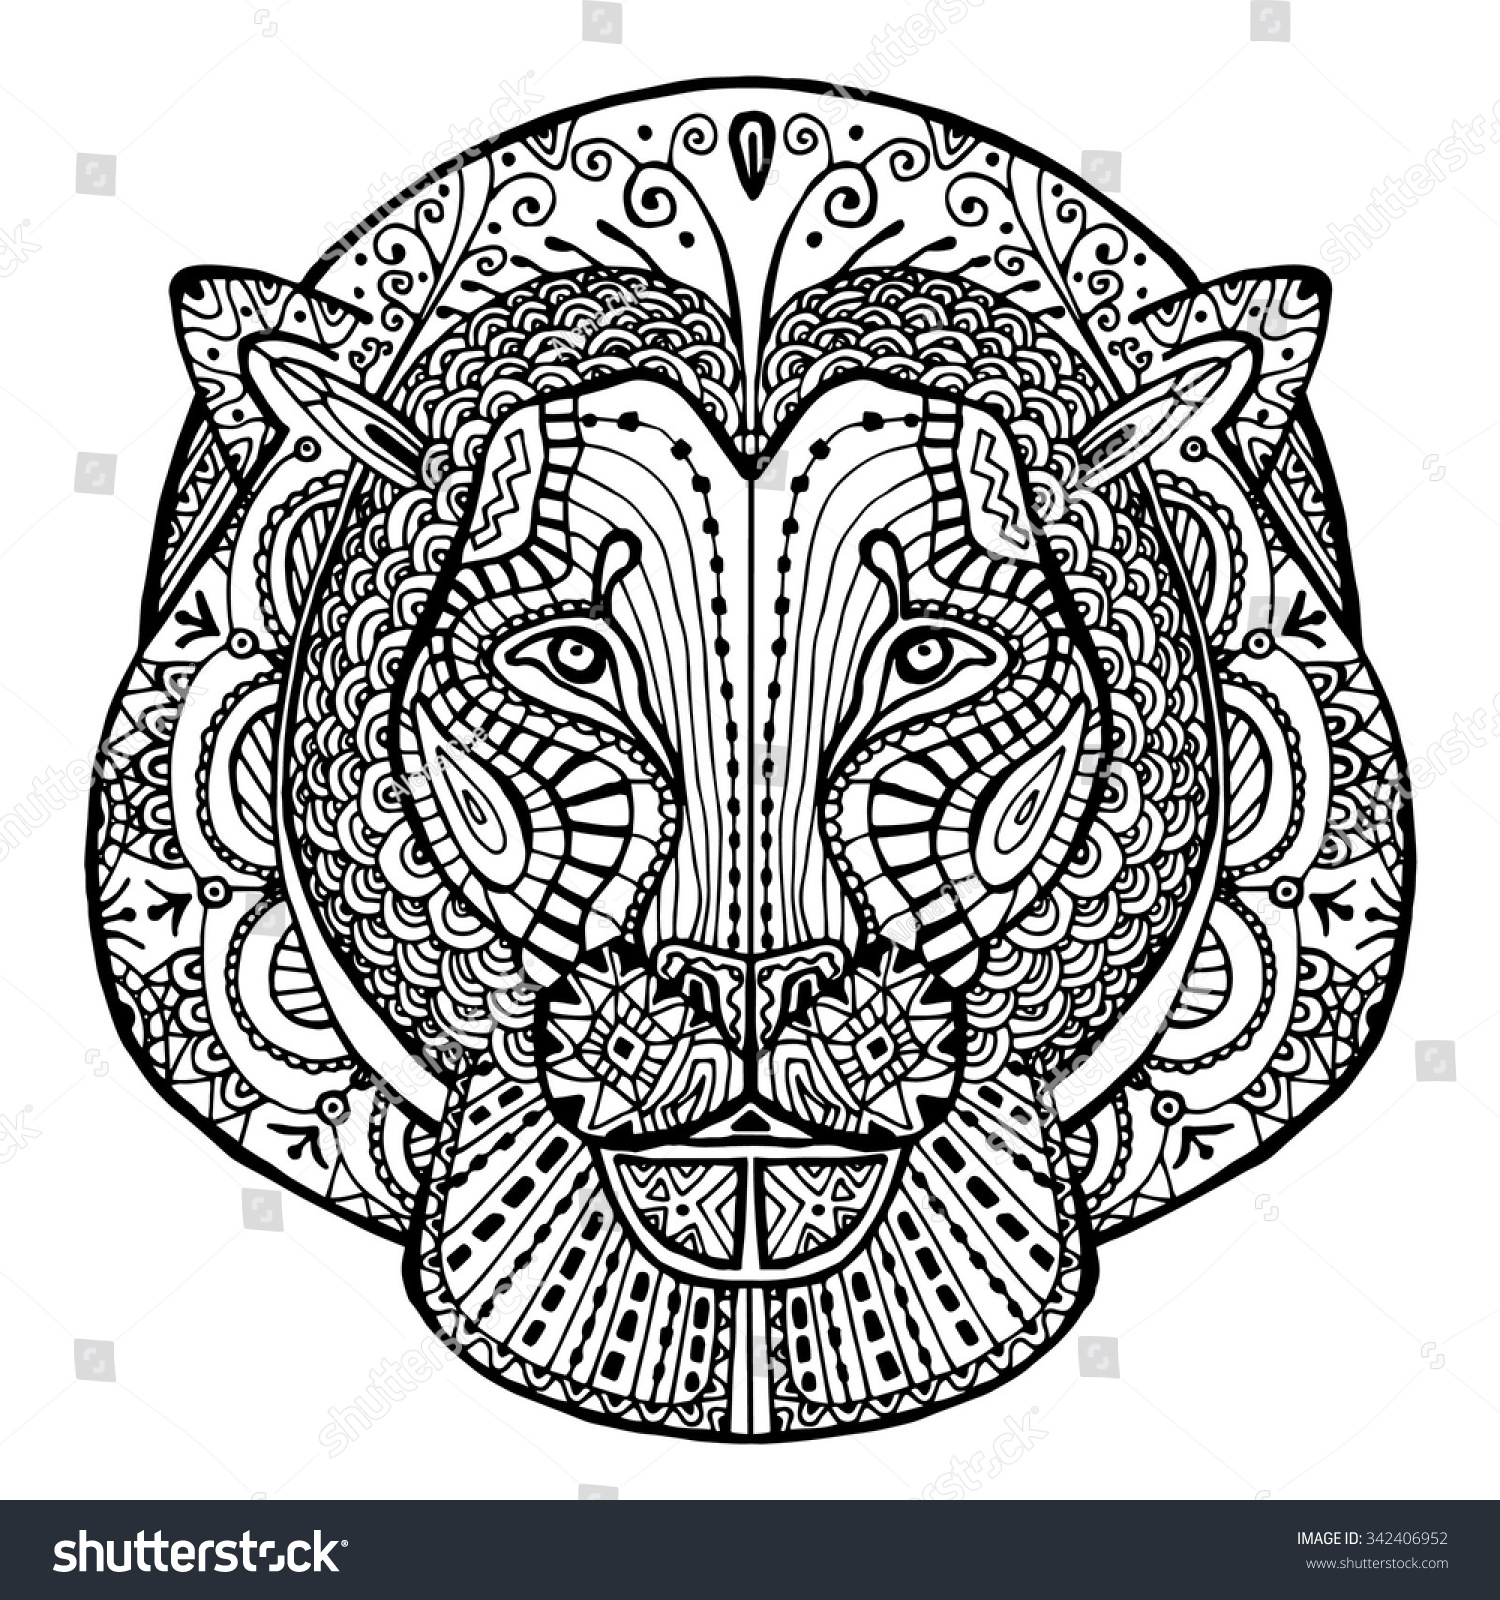 Black White Drawing Lion Patterns Zentangle Stock Vector 342406952 ...